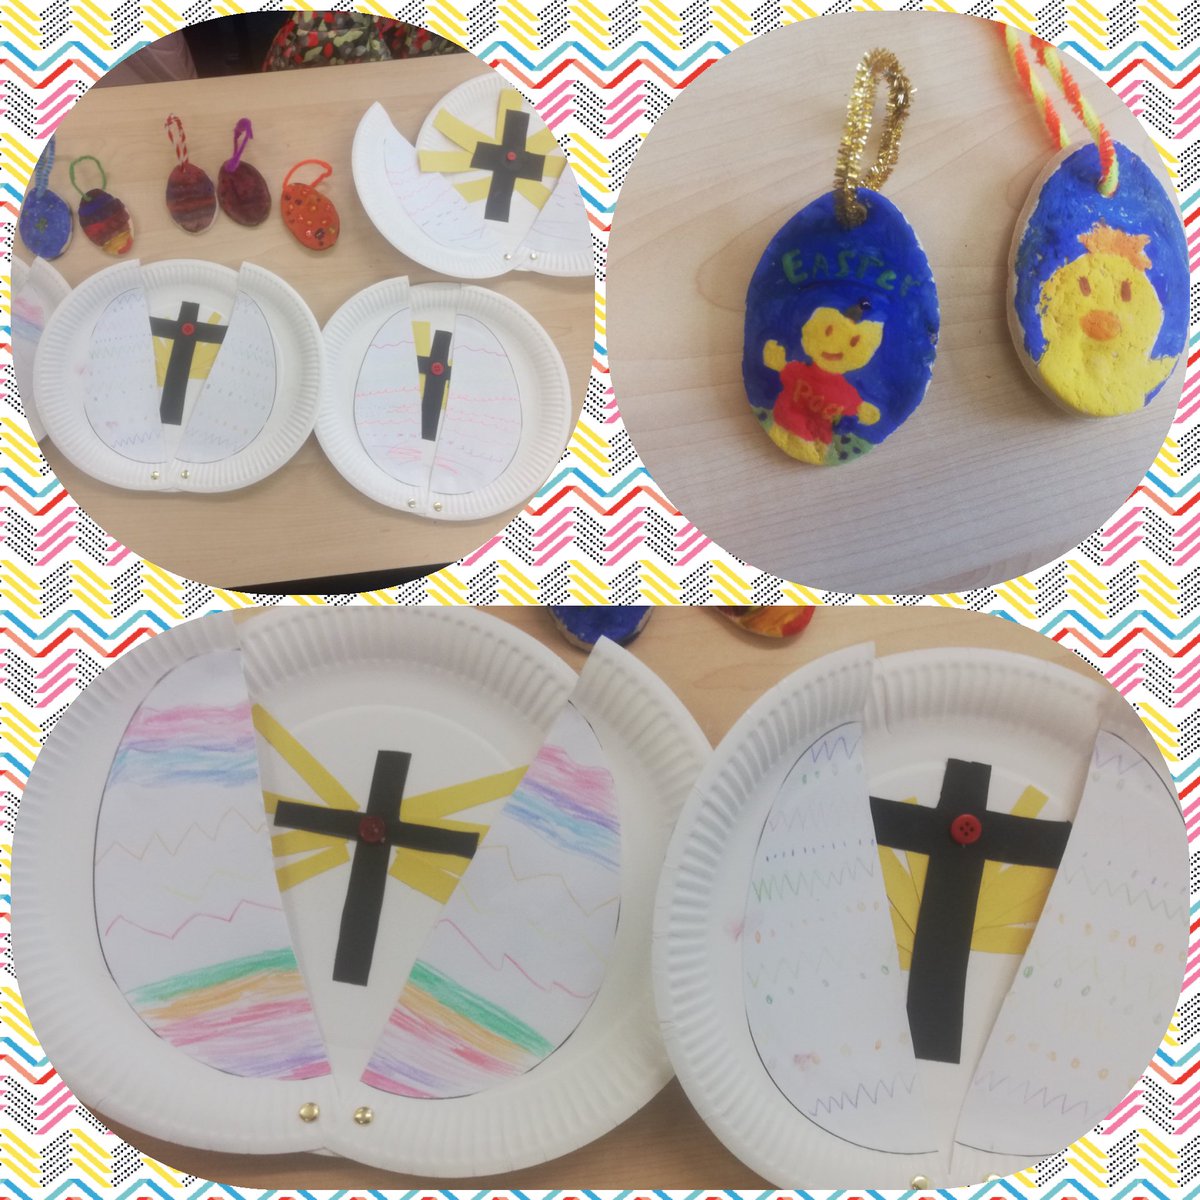 Great Easter Craft from Year 5. Happy Easter Everyone 🐣
#EasterCraft